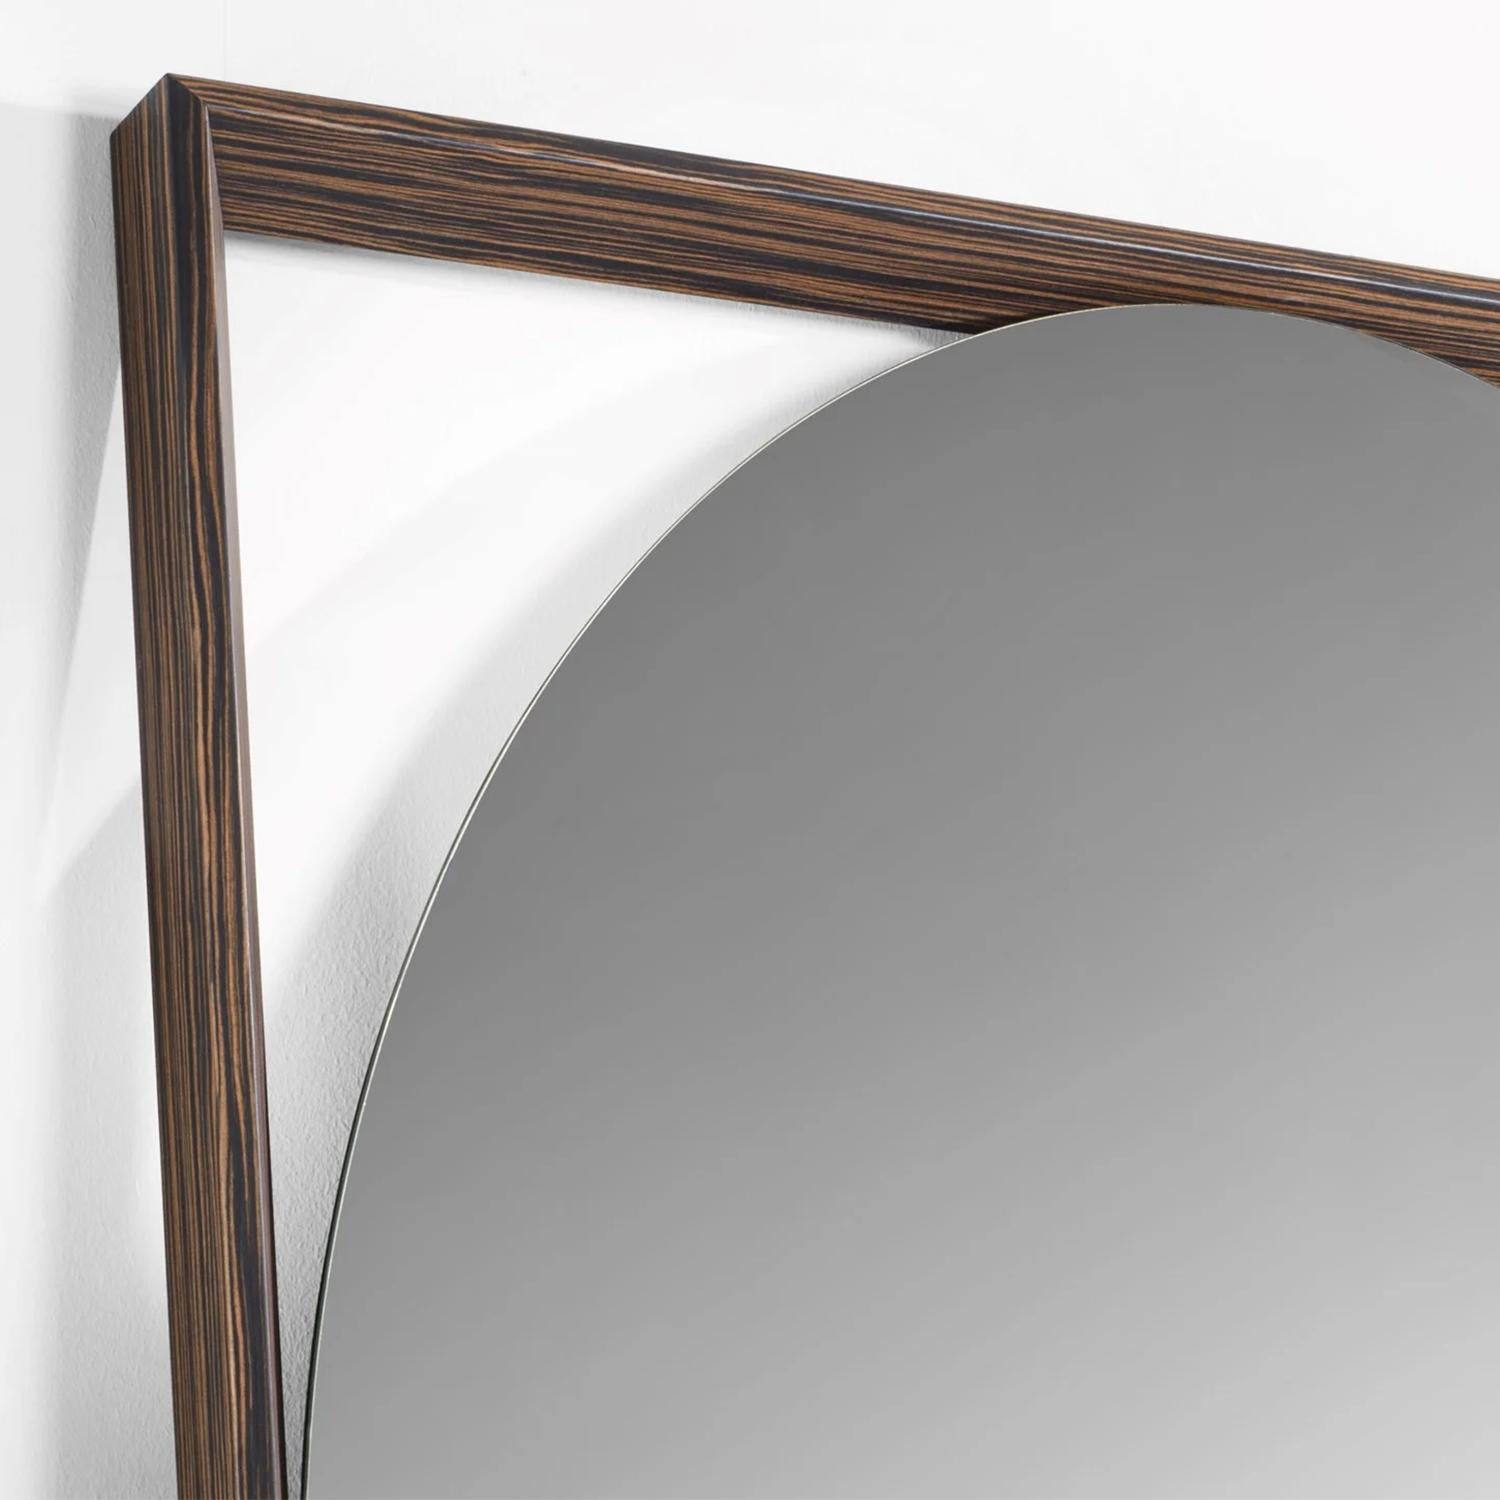 Mirror Loma Gate Stained with solid ash frame in walnut
stained finish. With round mirror glass. Loma Gate Mirror
is a floor mirror or a wall mirror. Also available with frame
in blackened stained finish, on request.